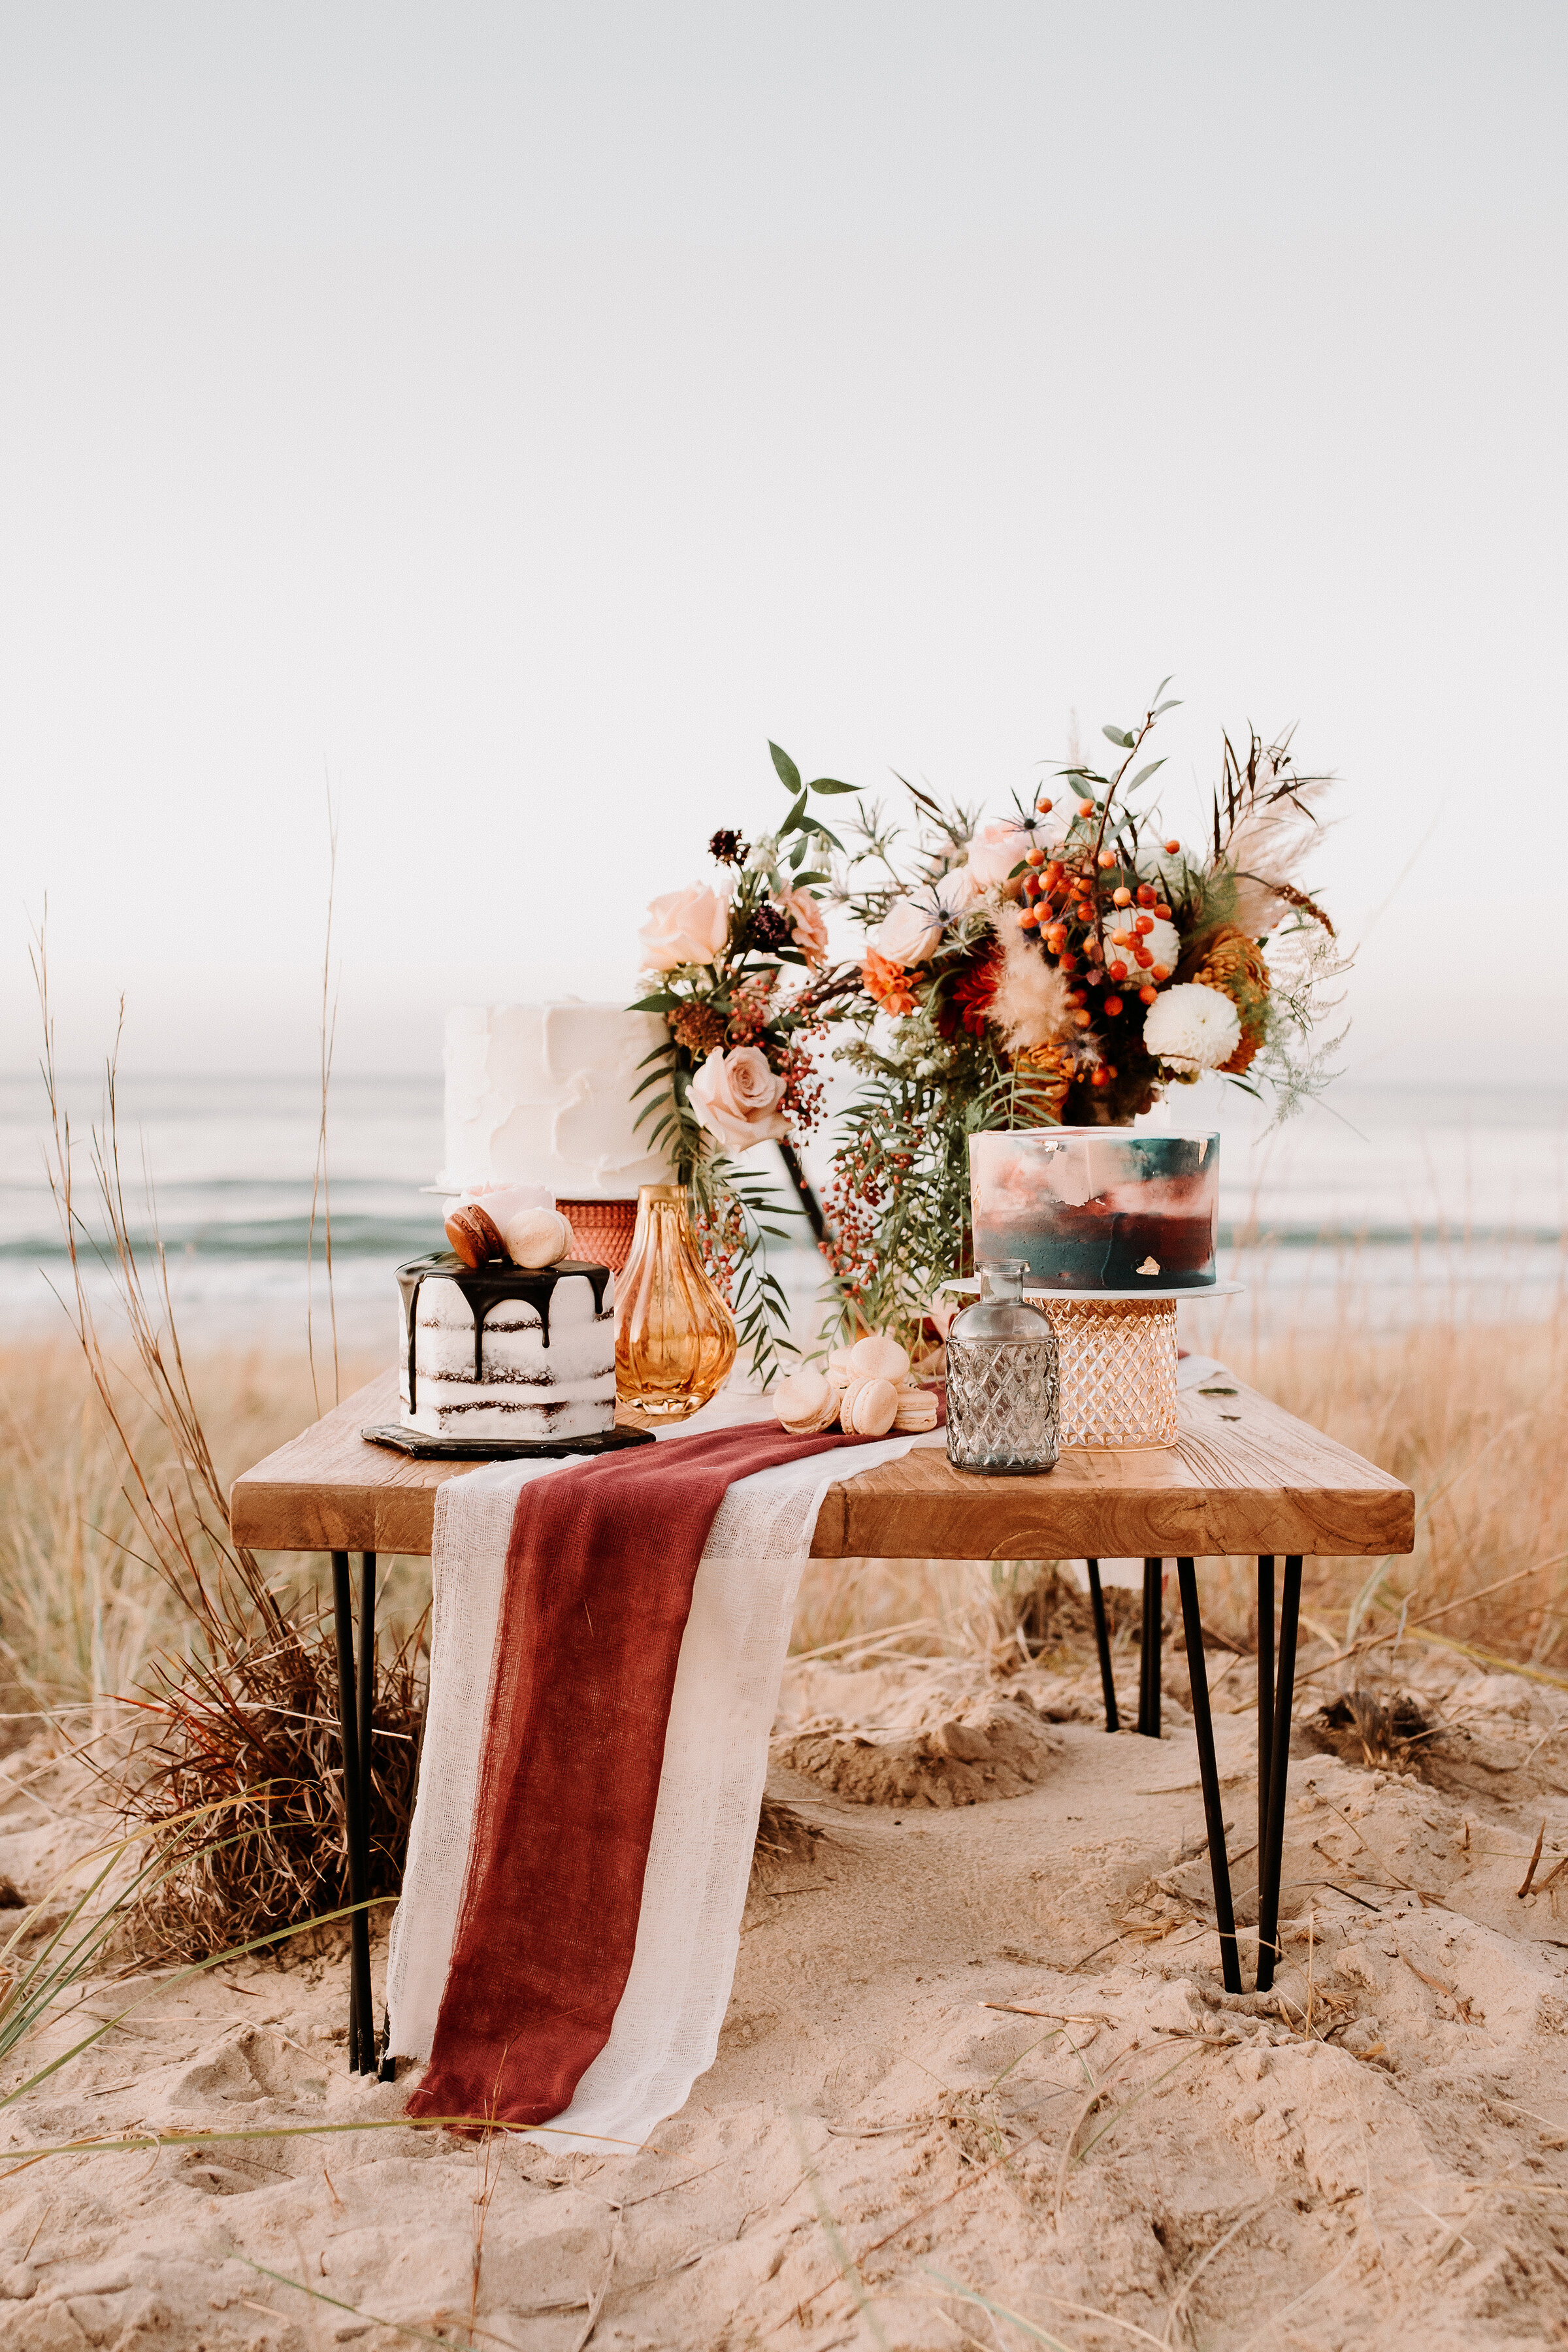  Inspiration for your boho beach wedding from this styled elopement on the sandy shores of Lake Michigan in Indiana Dunes State Park with professional photography by Kindred + Co. midwest wedding photographer boho beach wedding vibes for the adventur